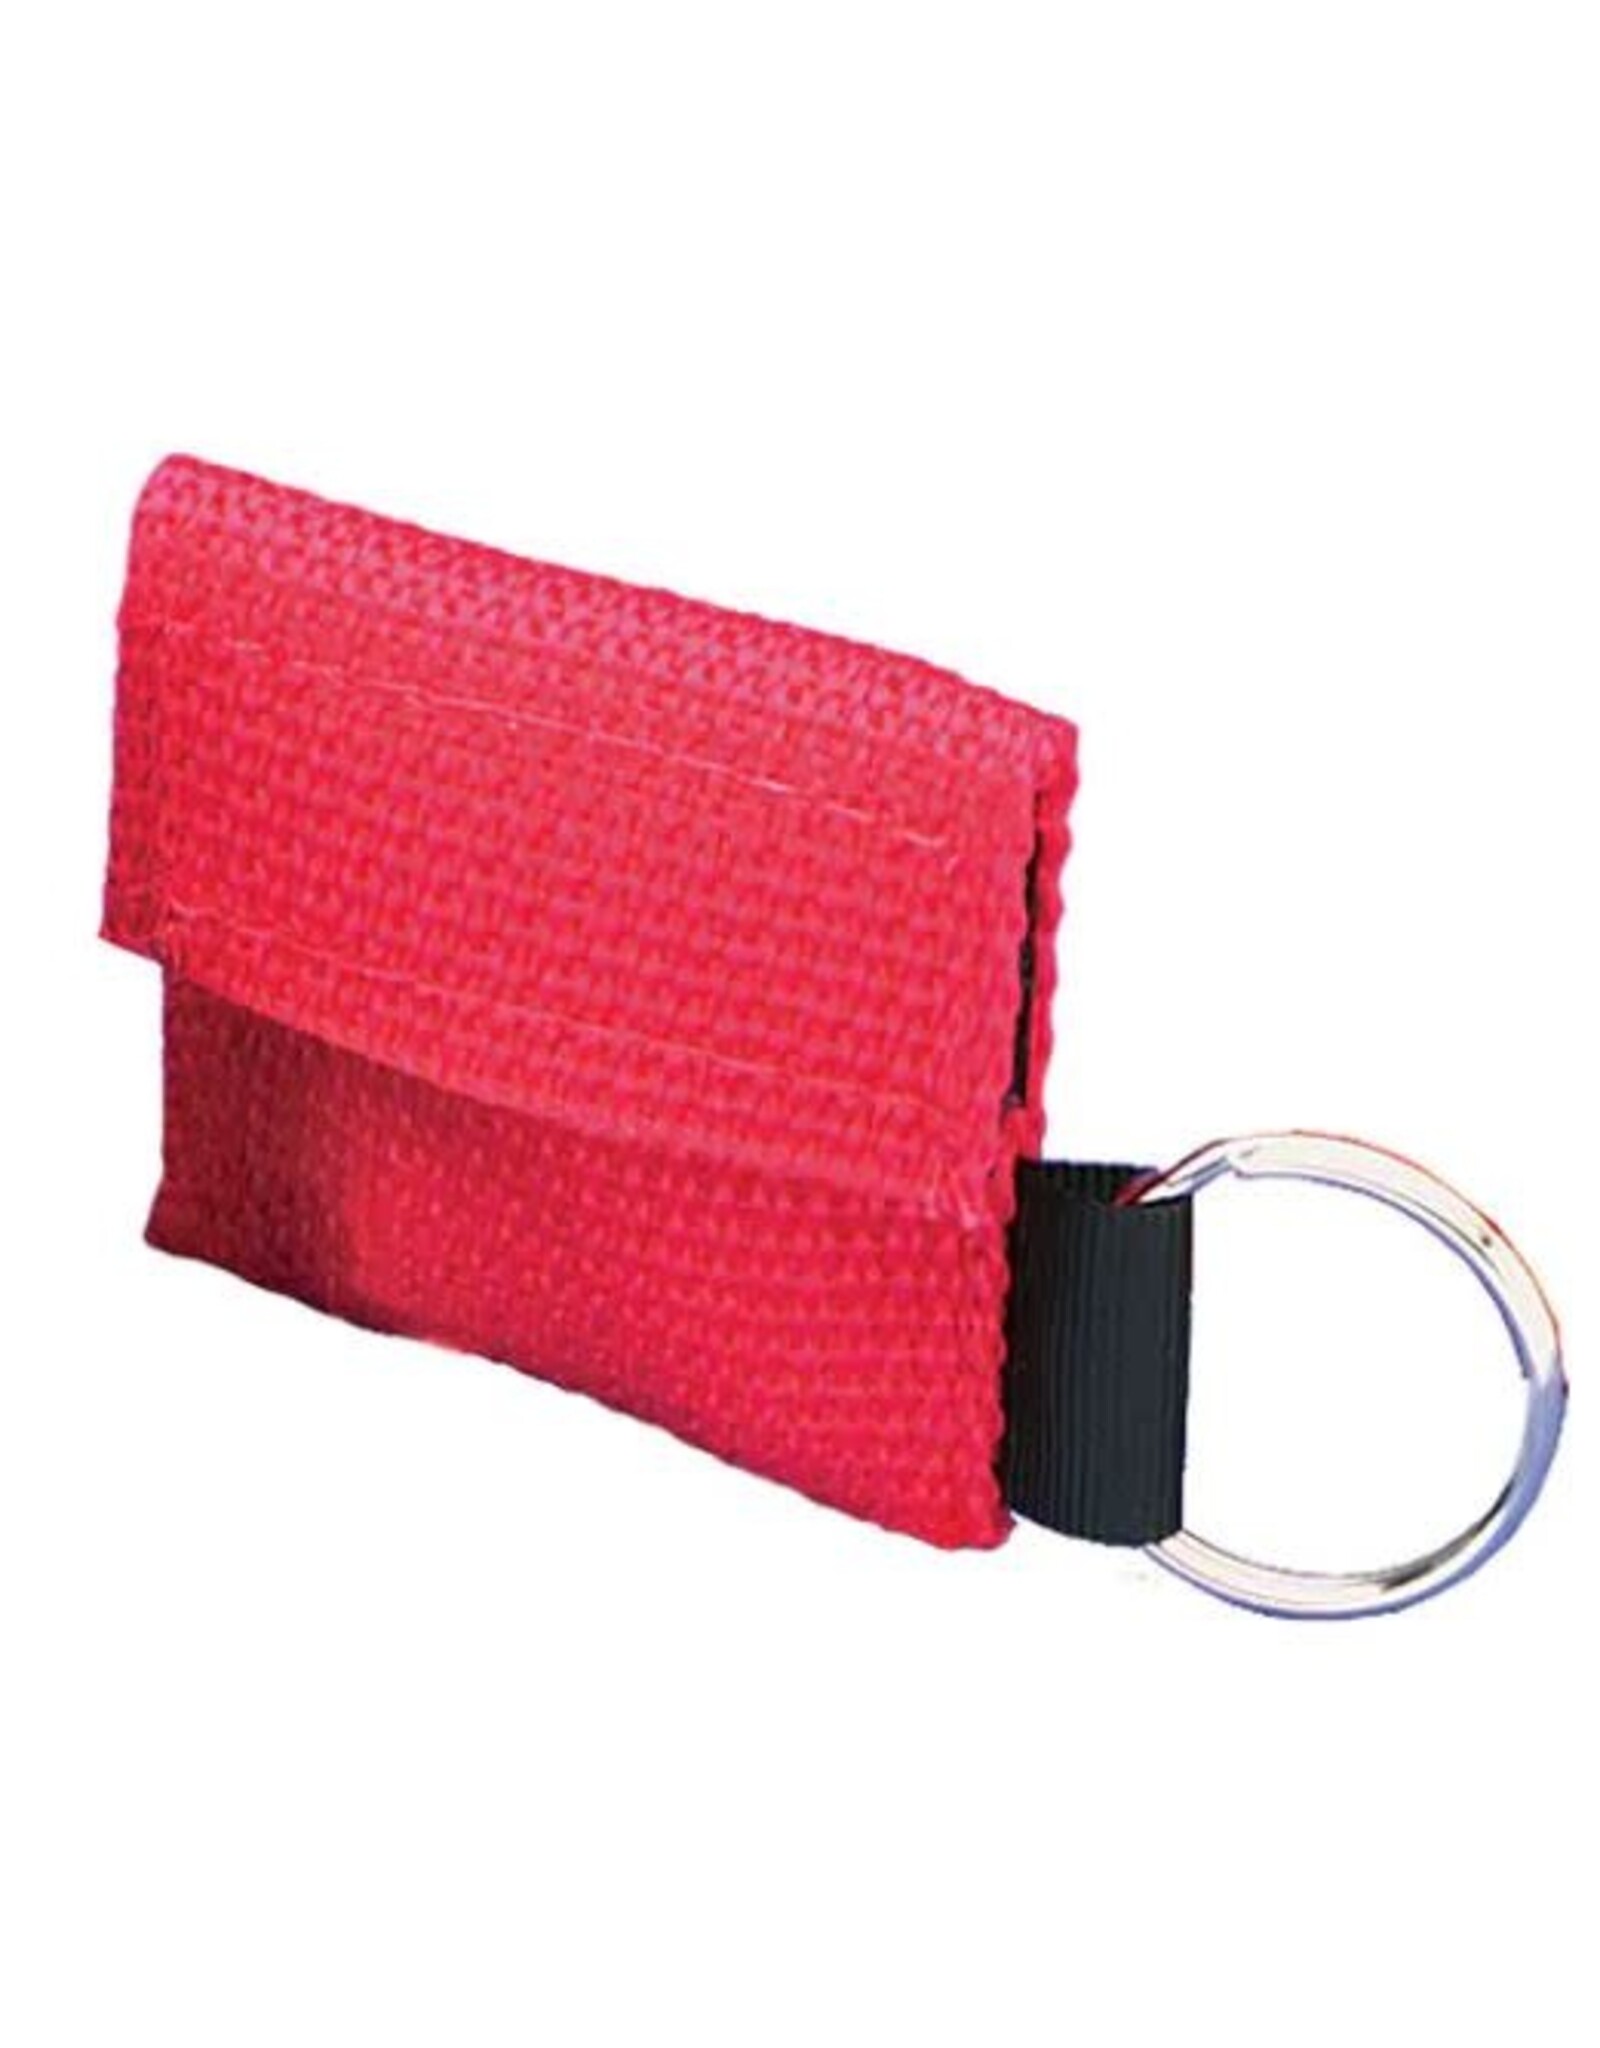 CPR Face shield + Pouch/Key Ring, Red